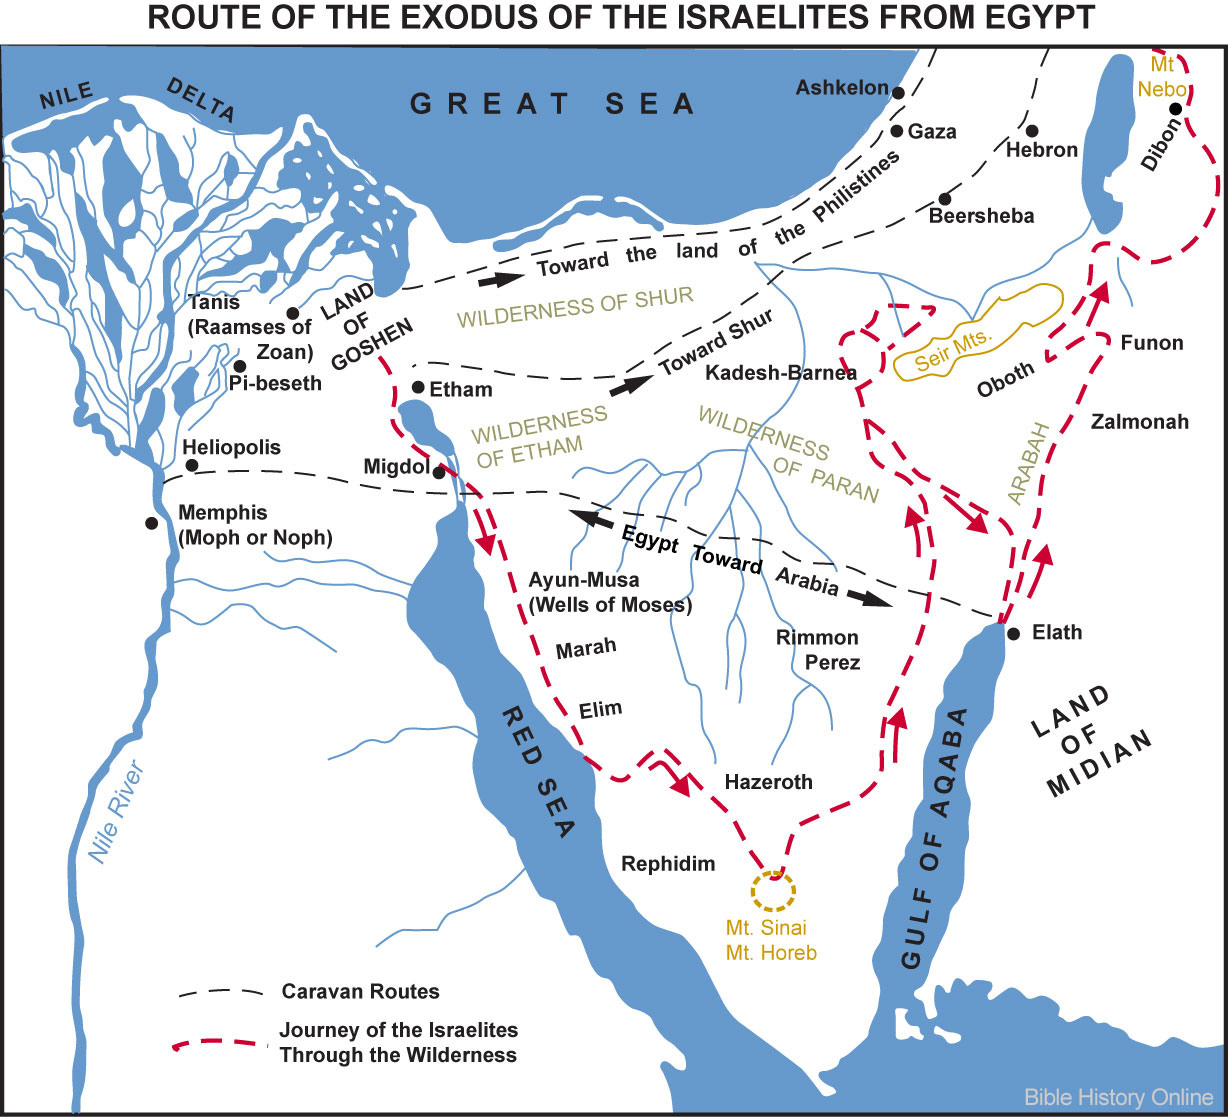 Map Of The Route Of The Exodus Of The Israelites From Egypt Bible History